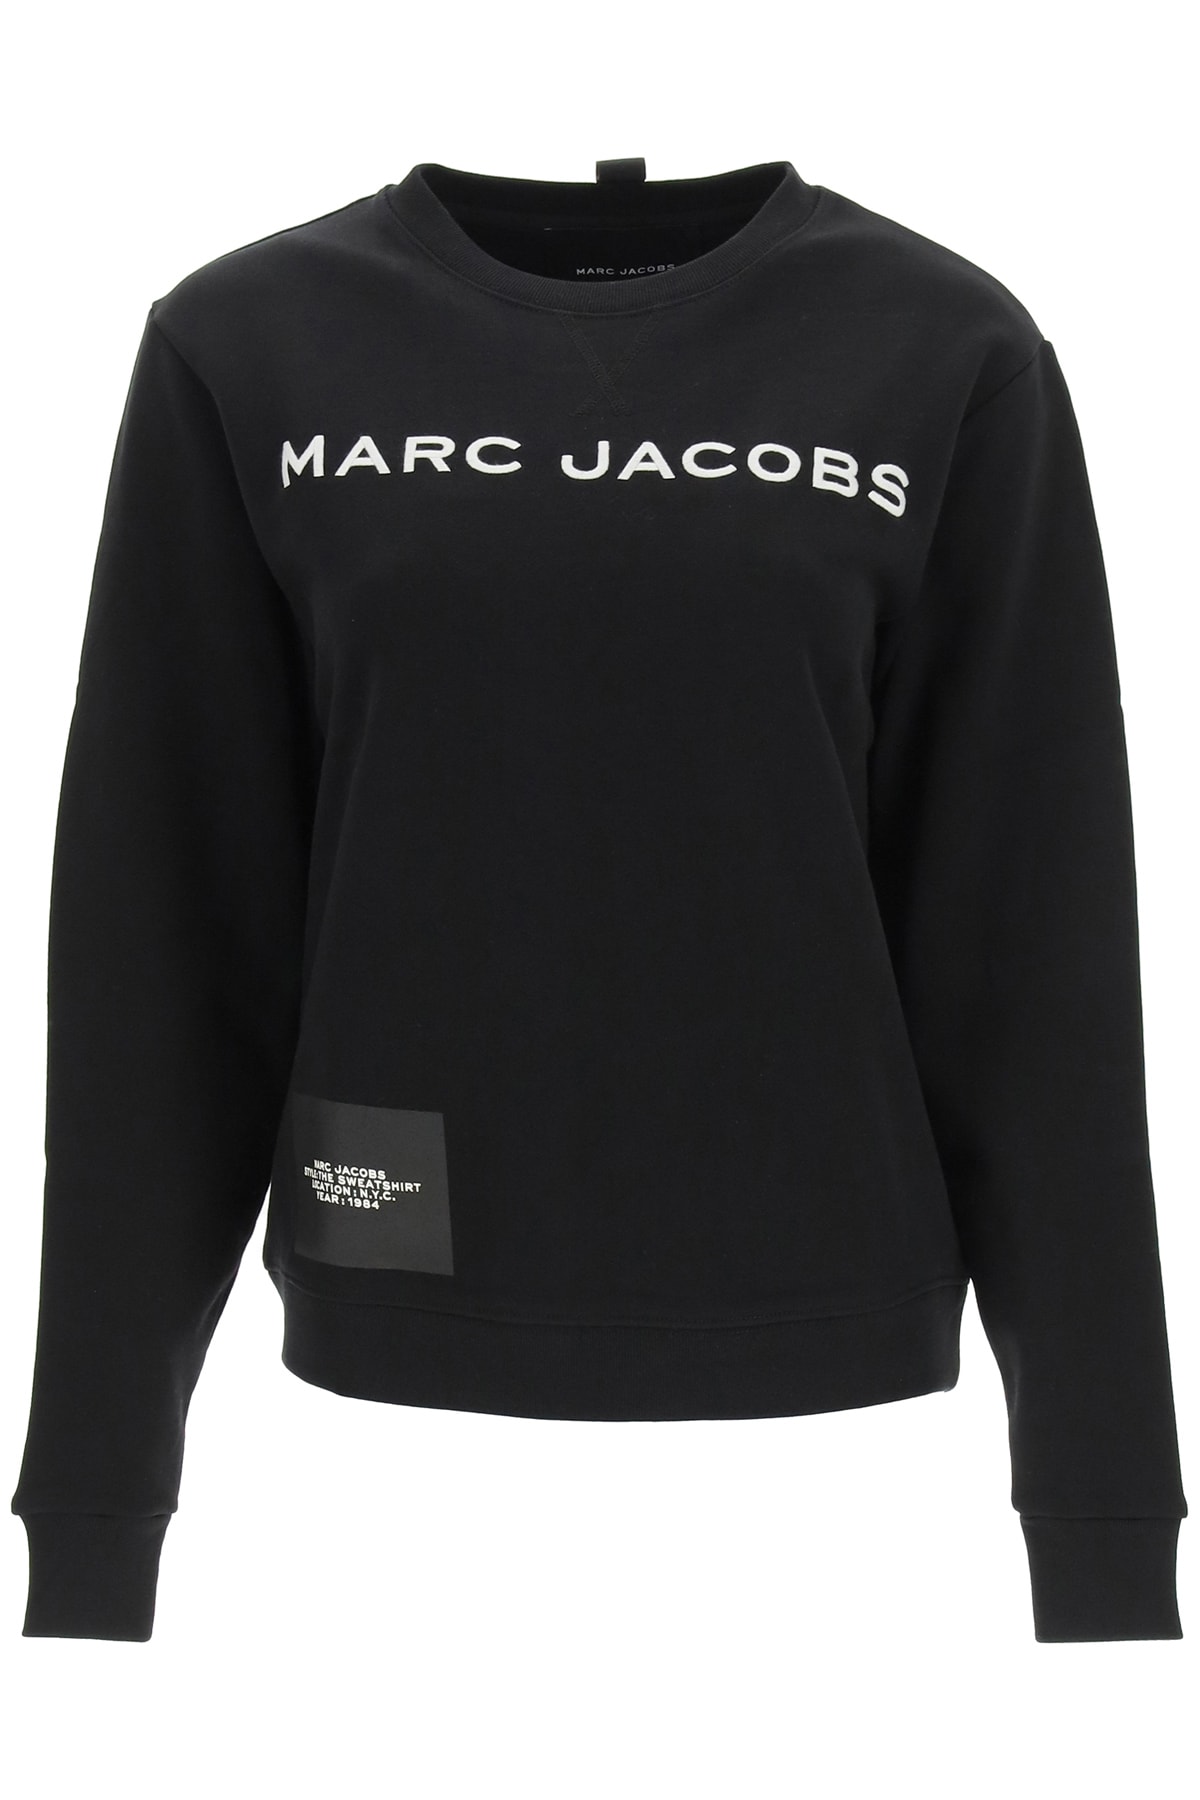 Marc Jacobs The Sweathshirt - The Color Collection